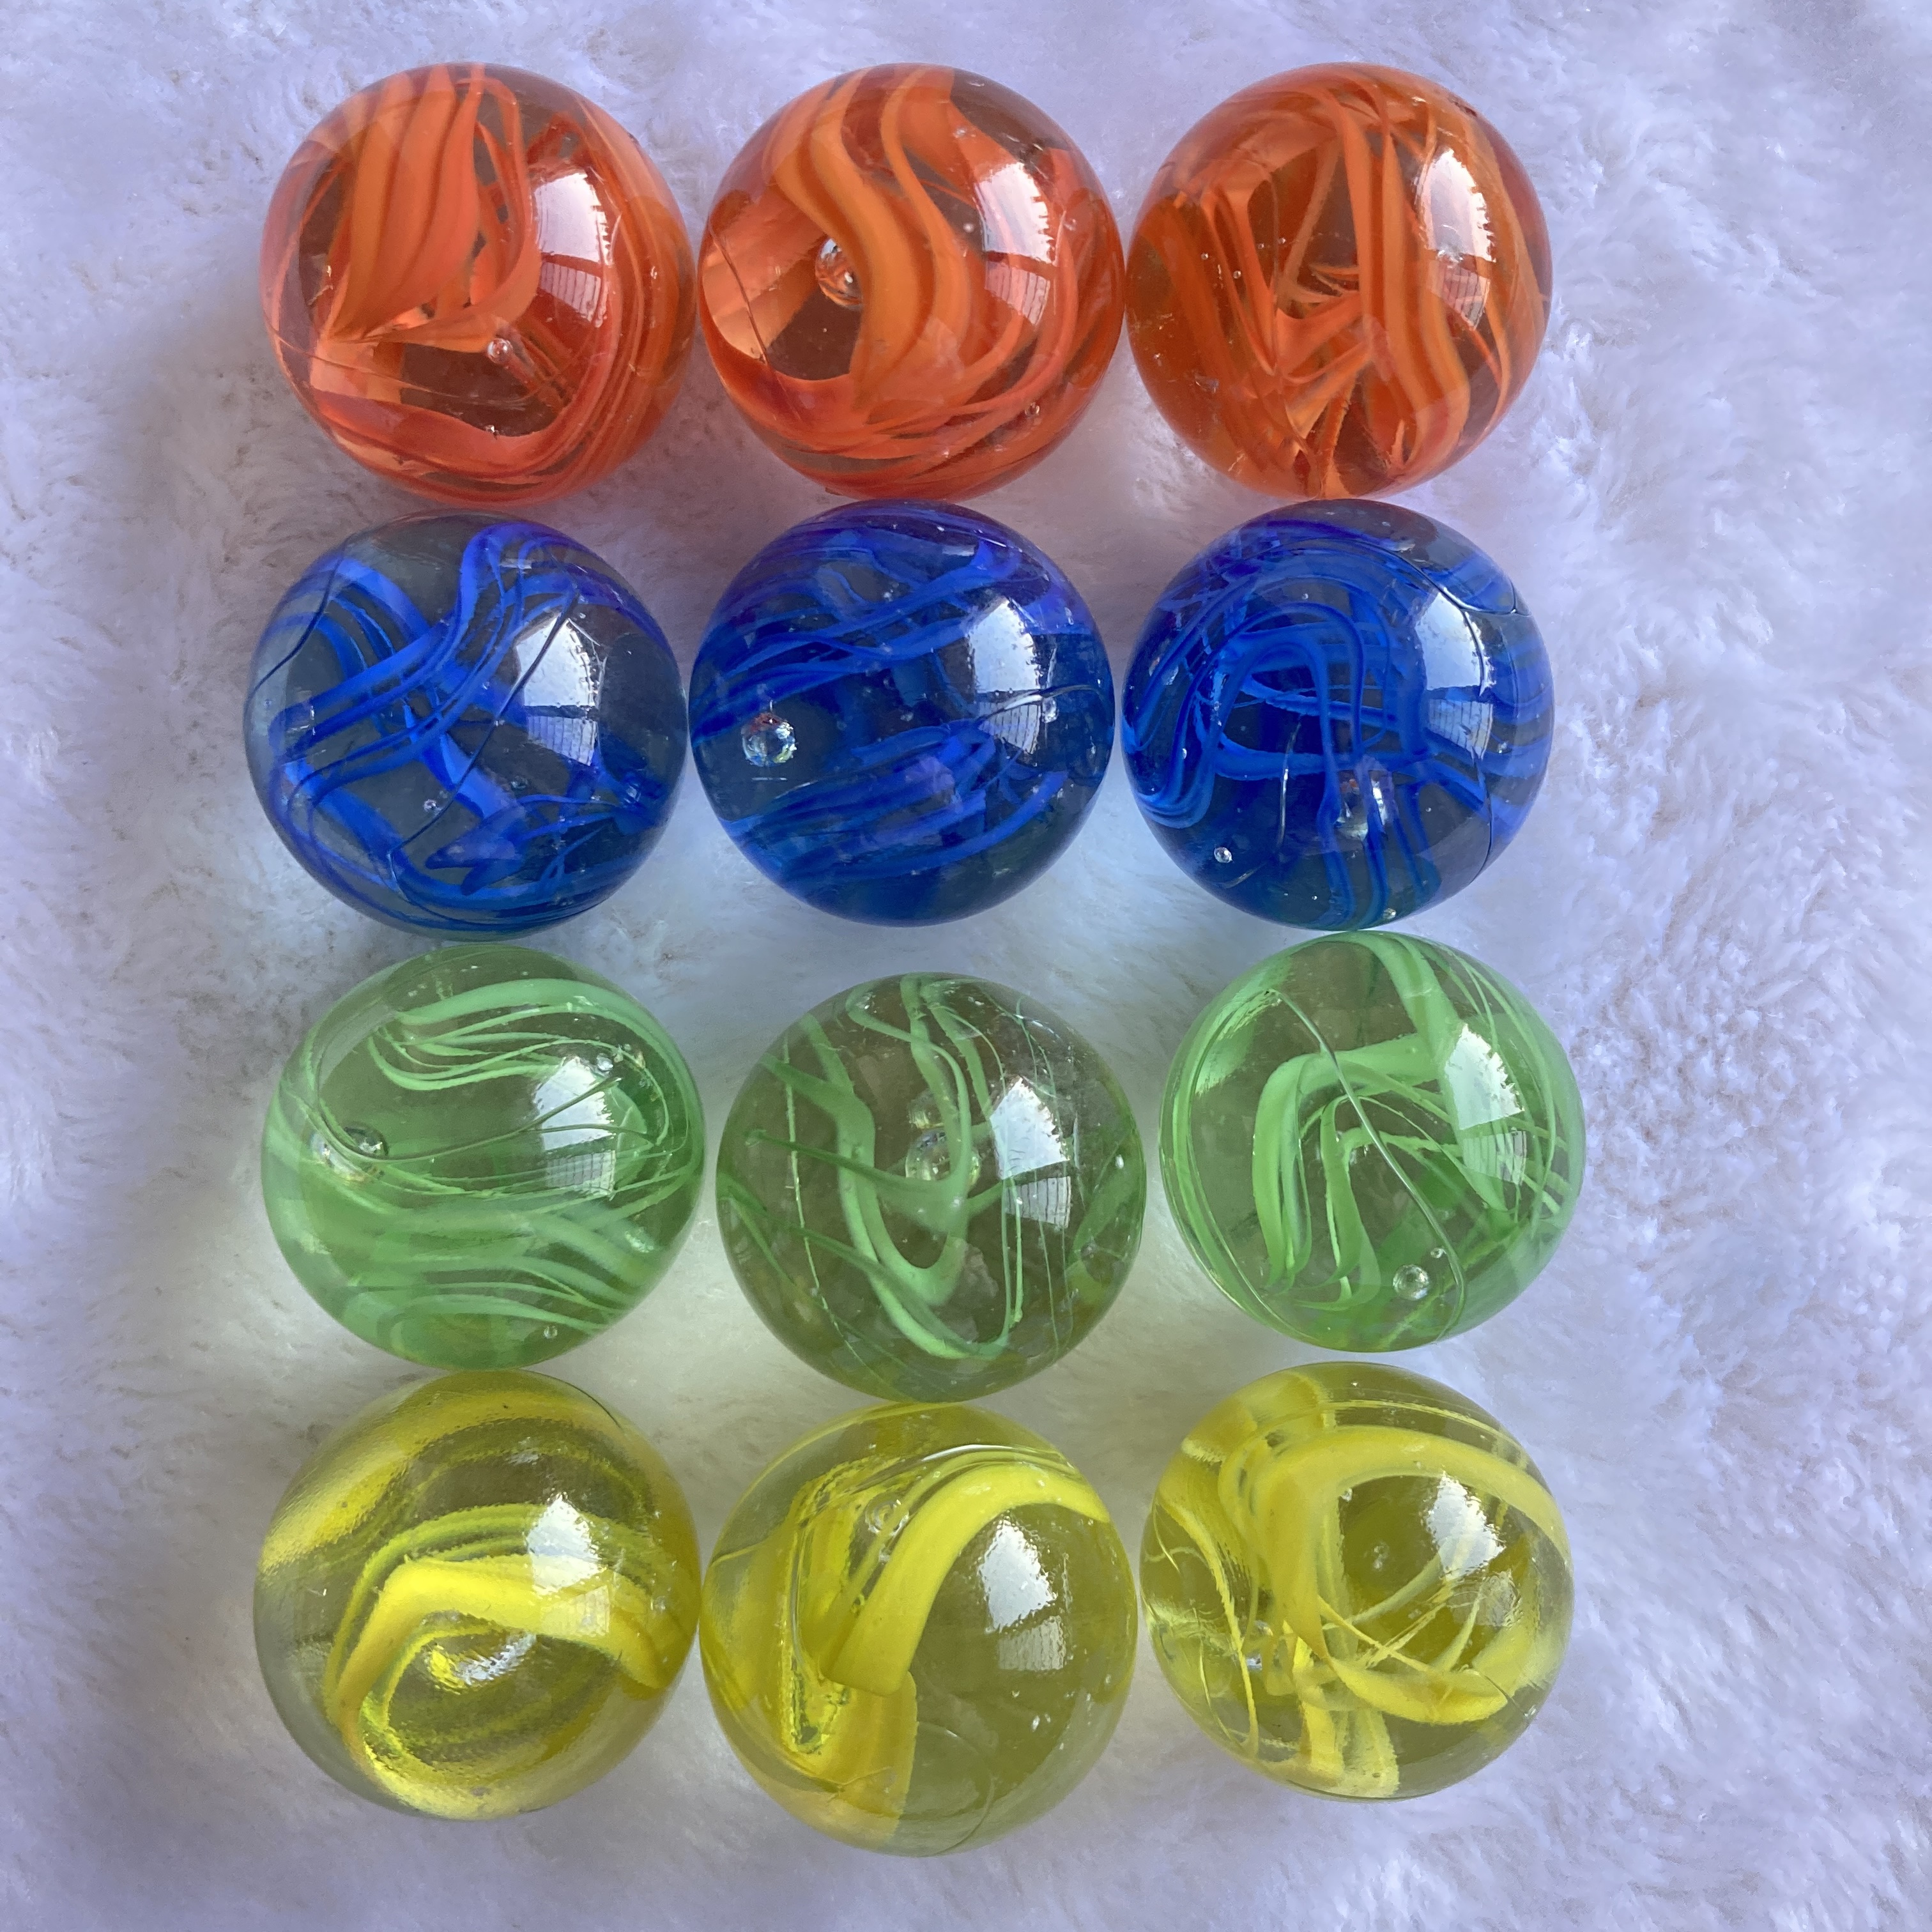 Wholesale High Quality Colored Toy Glass Marbles Balls - China